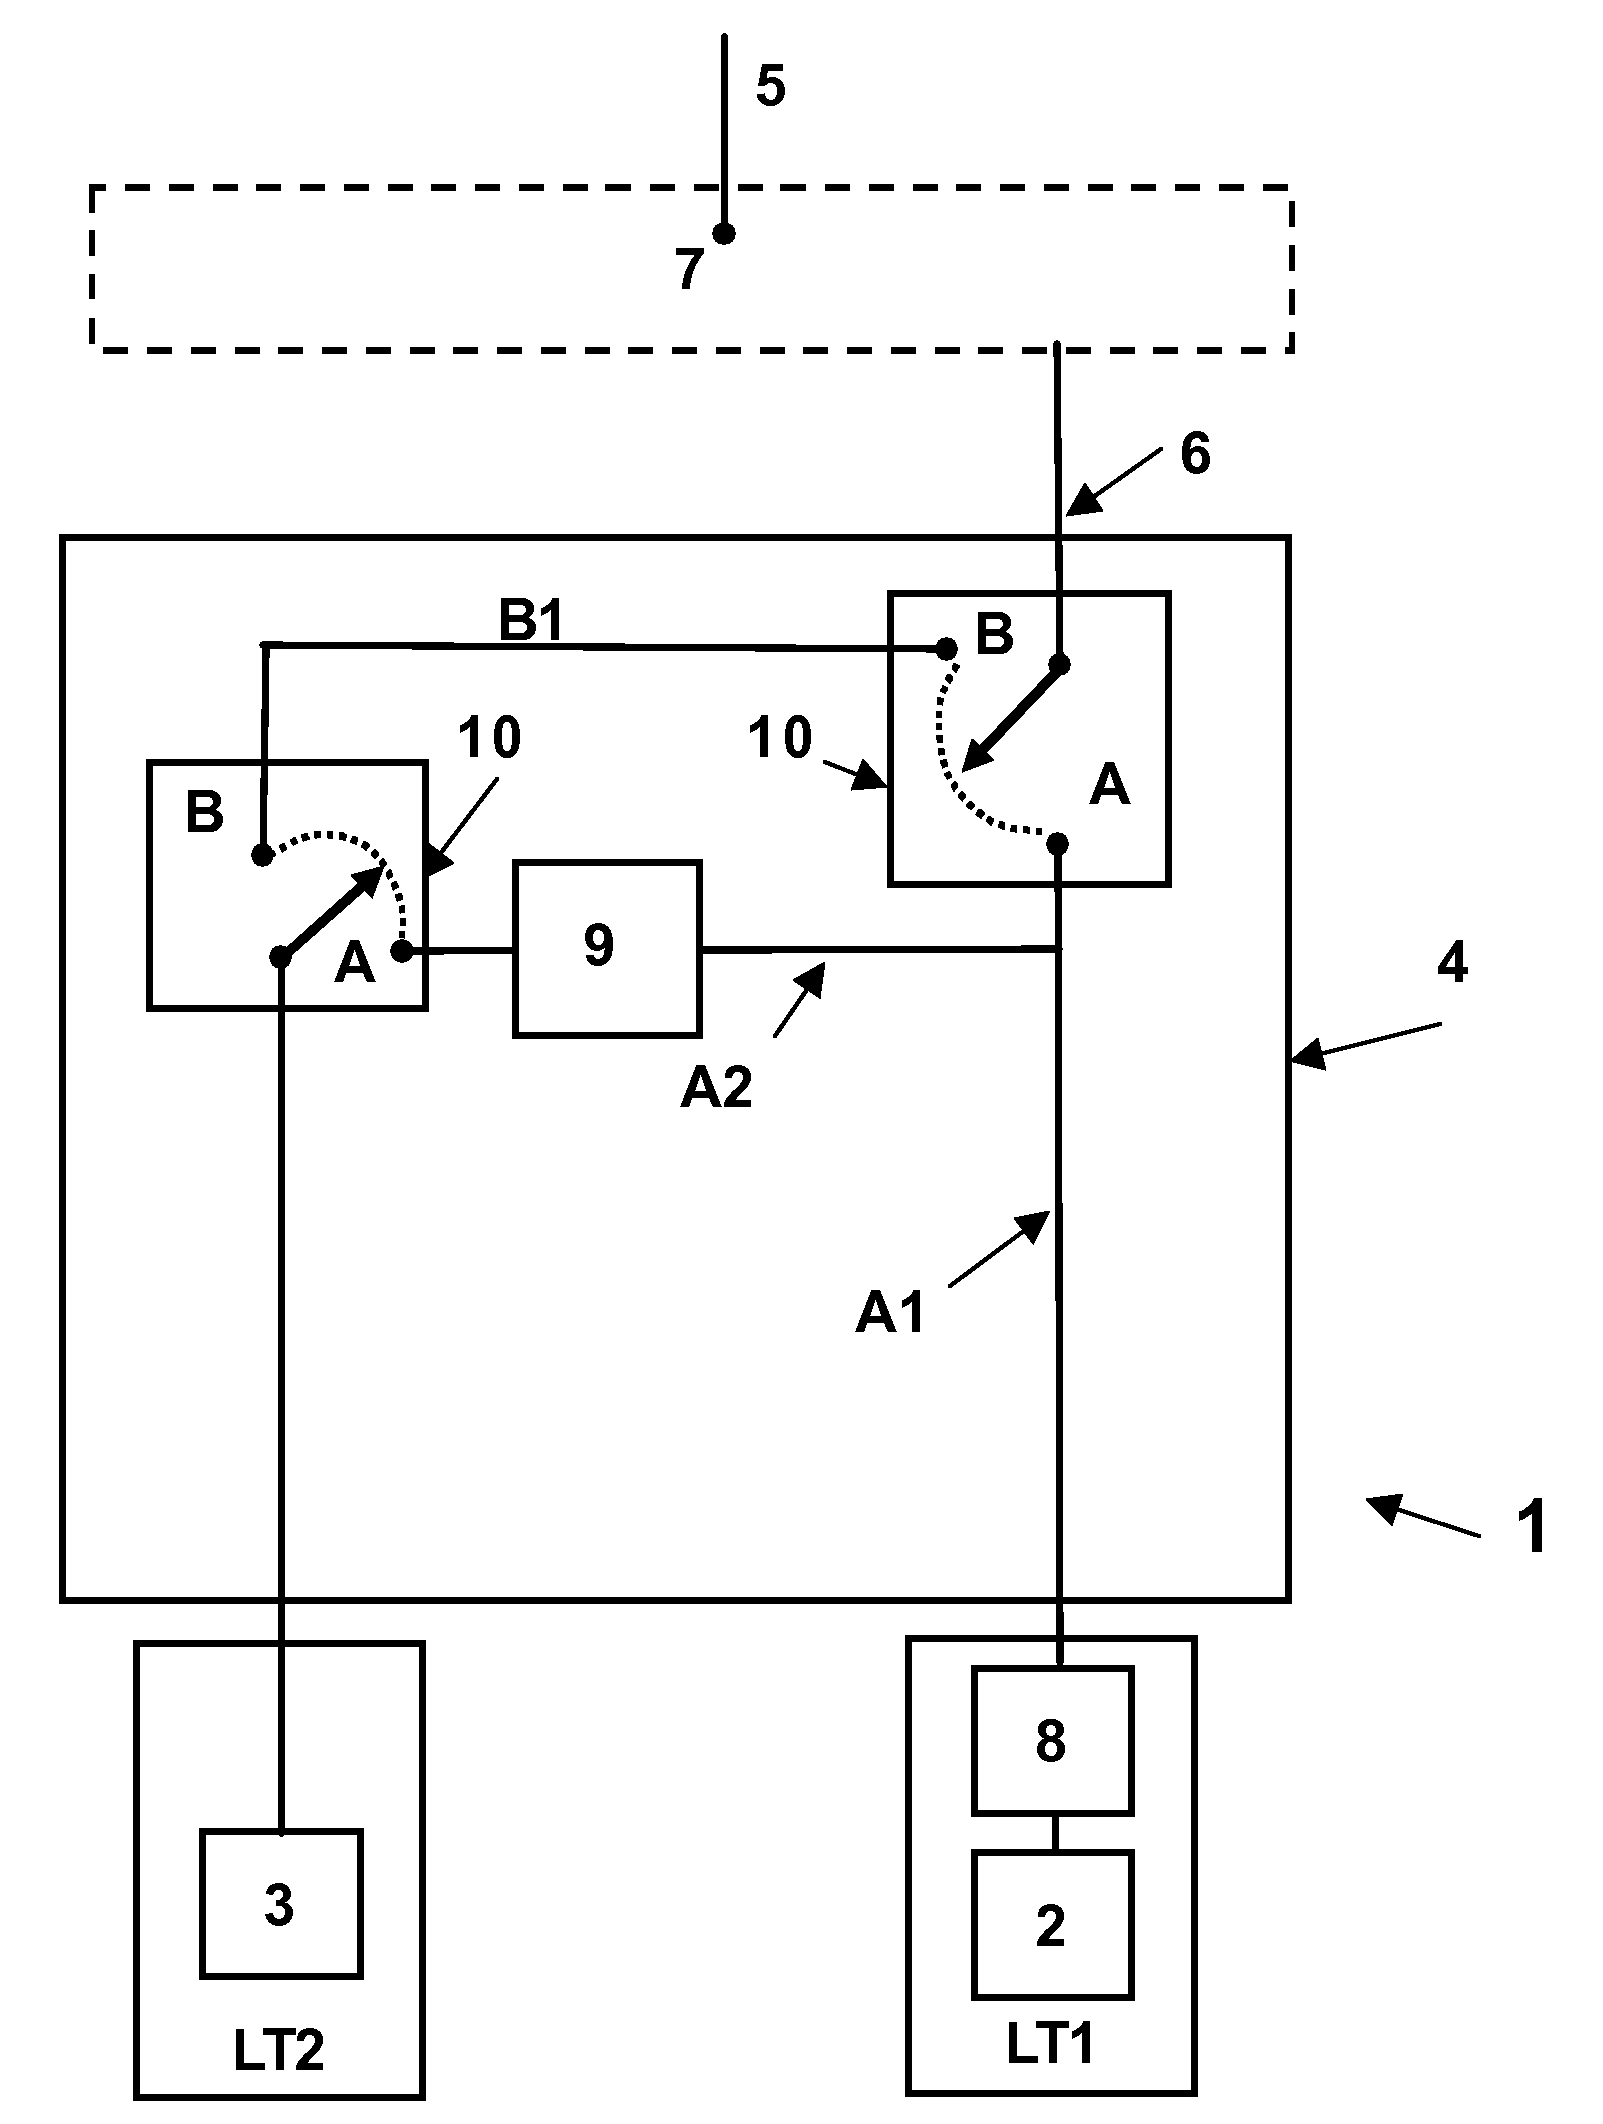 Line termination arrangement with combined broadband and narrowband services